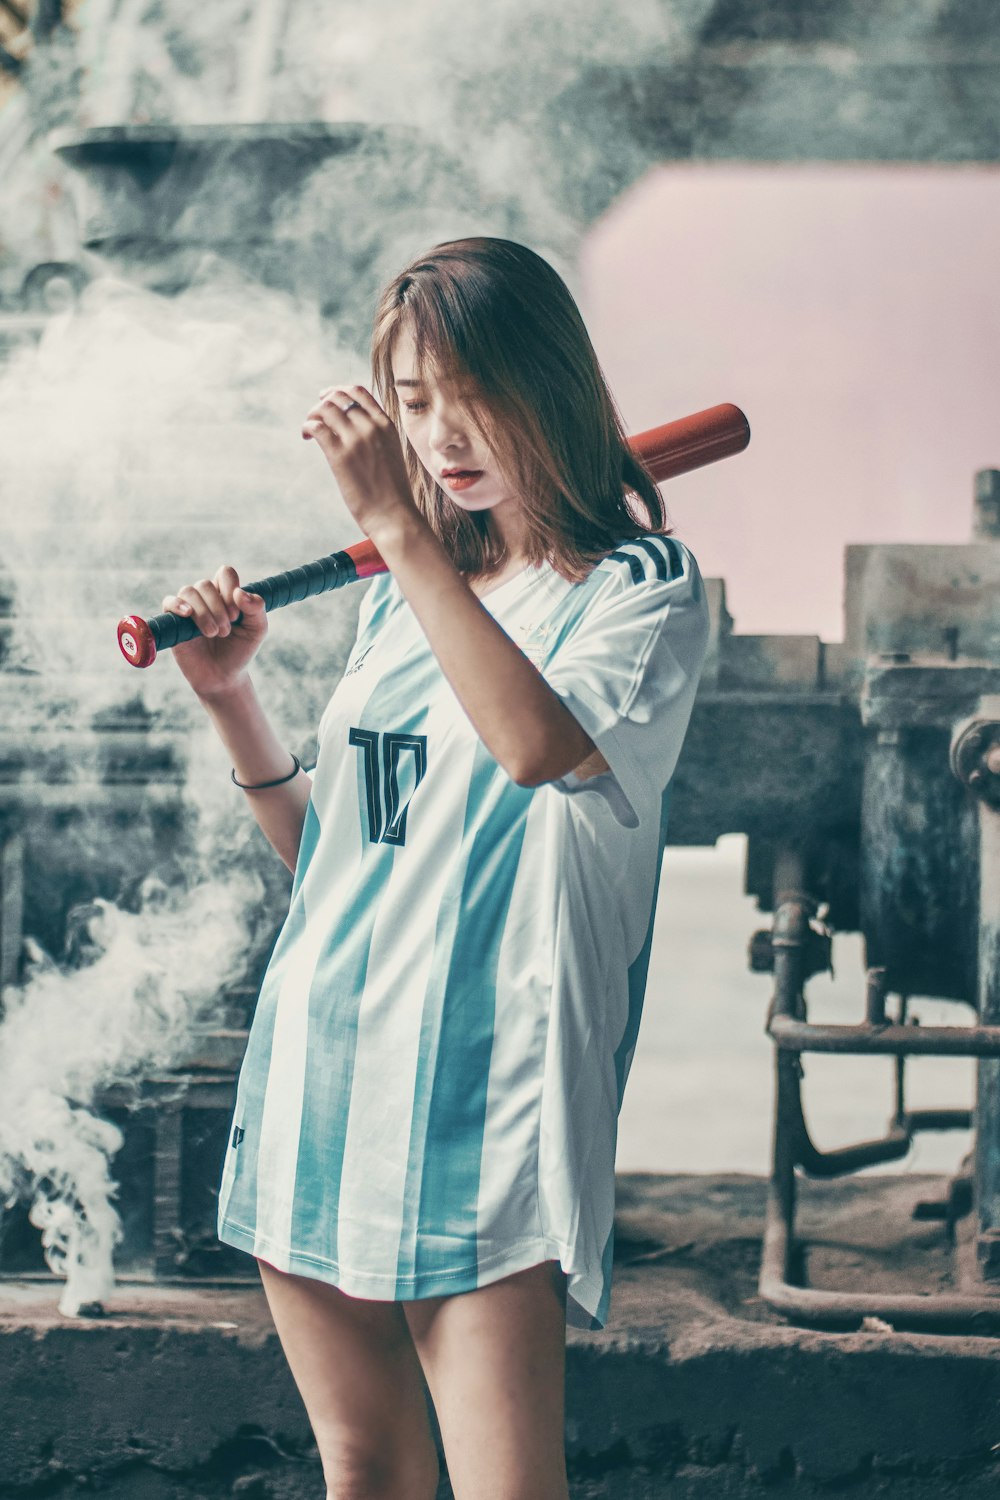 woman in white and blue long sleeve shirt holding red baseball bat